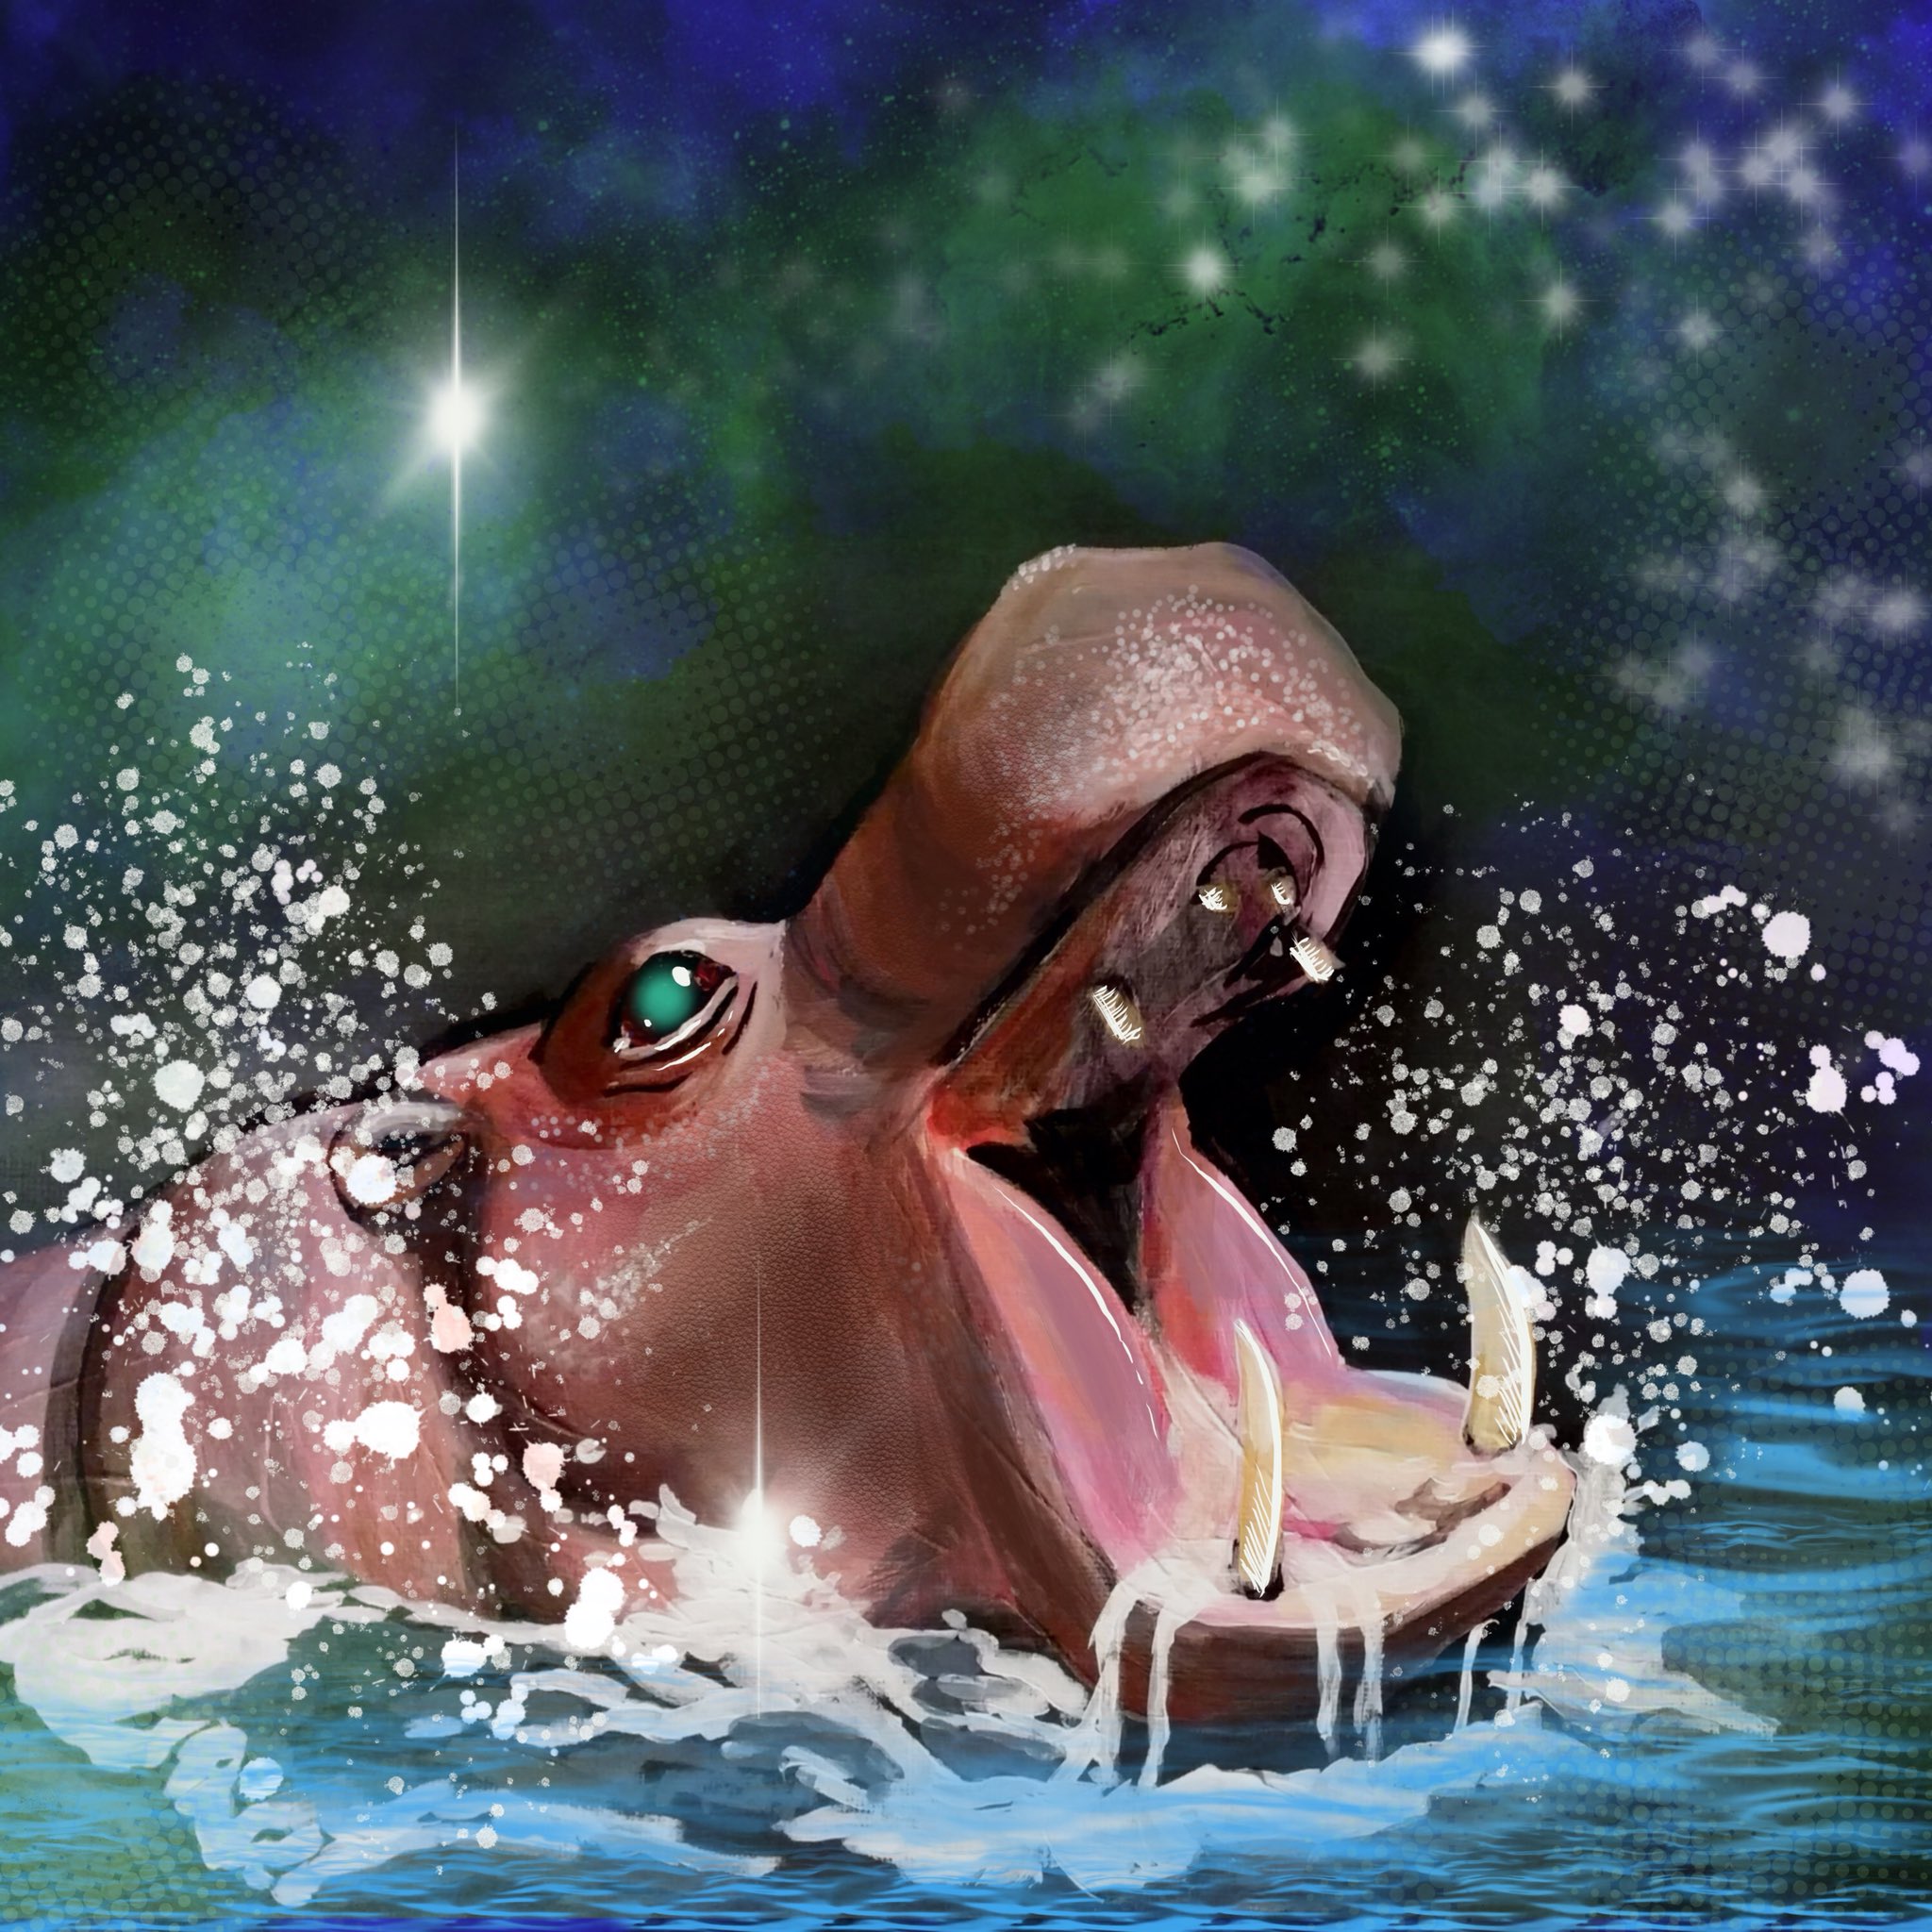 Pygmy Hippo emerging from the water with sparkles